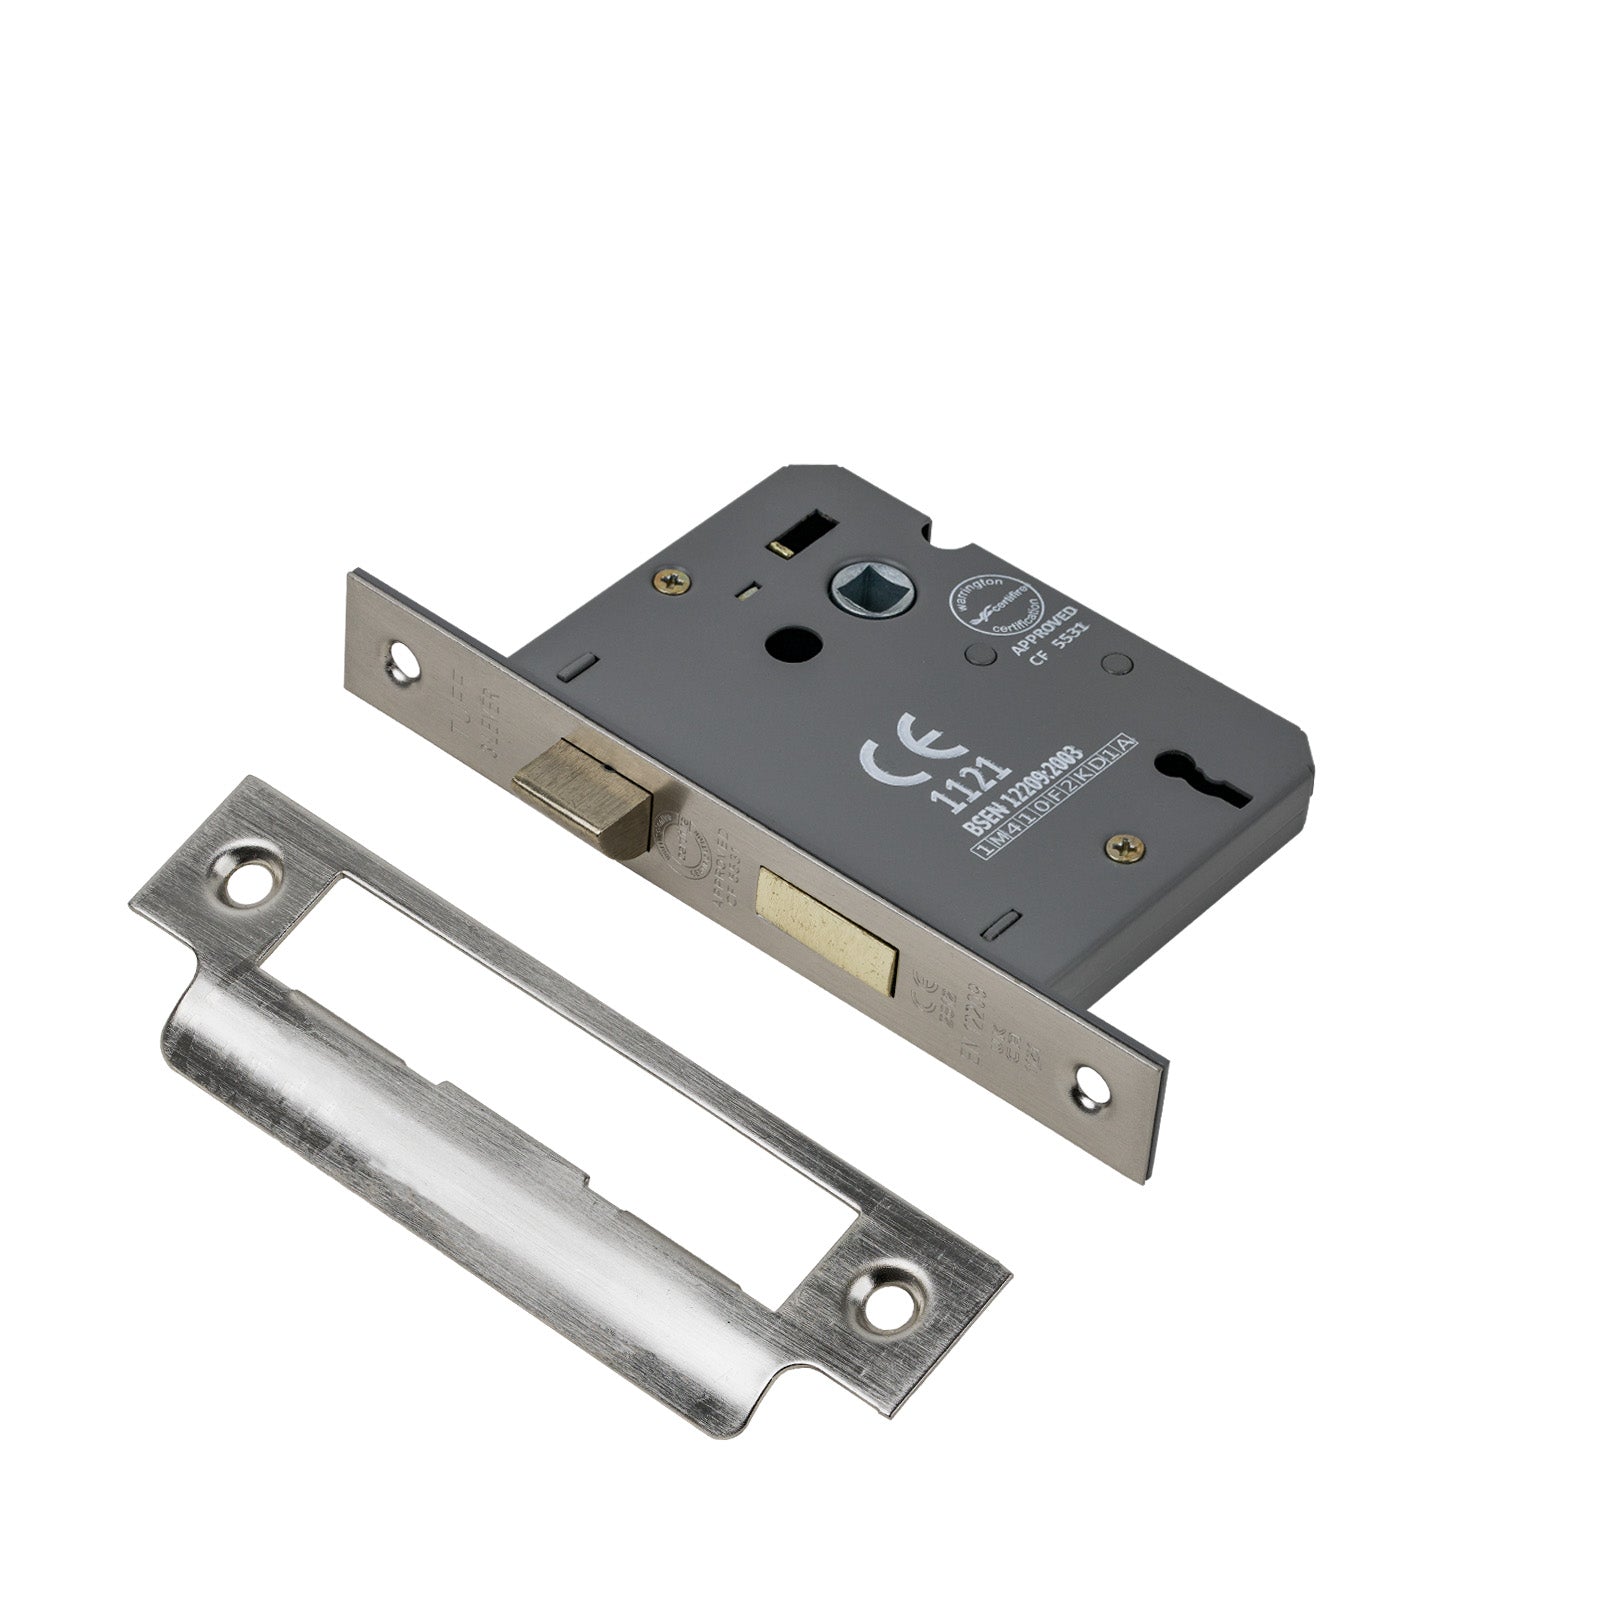 SHOW 3 Lever Sash Lock - 3 Inch with Nickel finished forend and striker plate